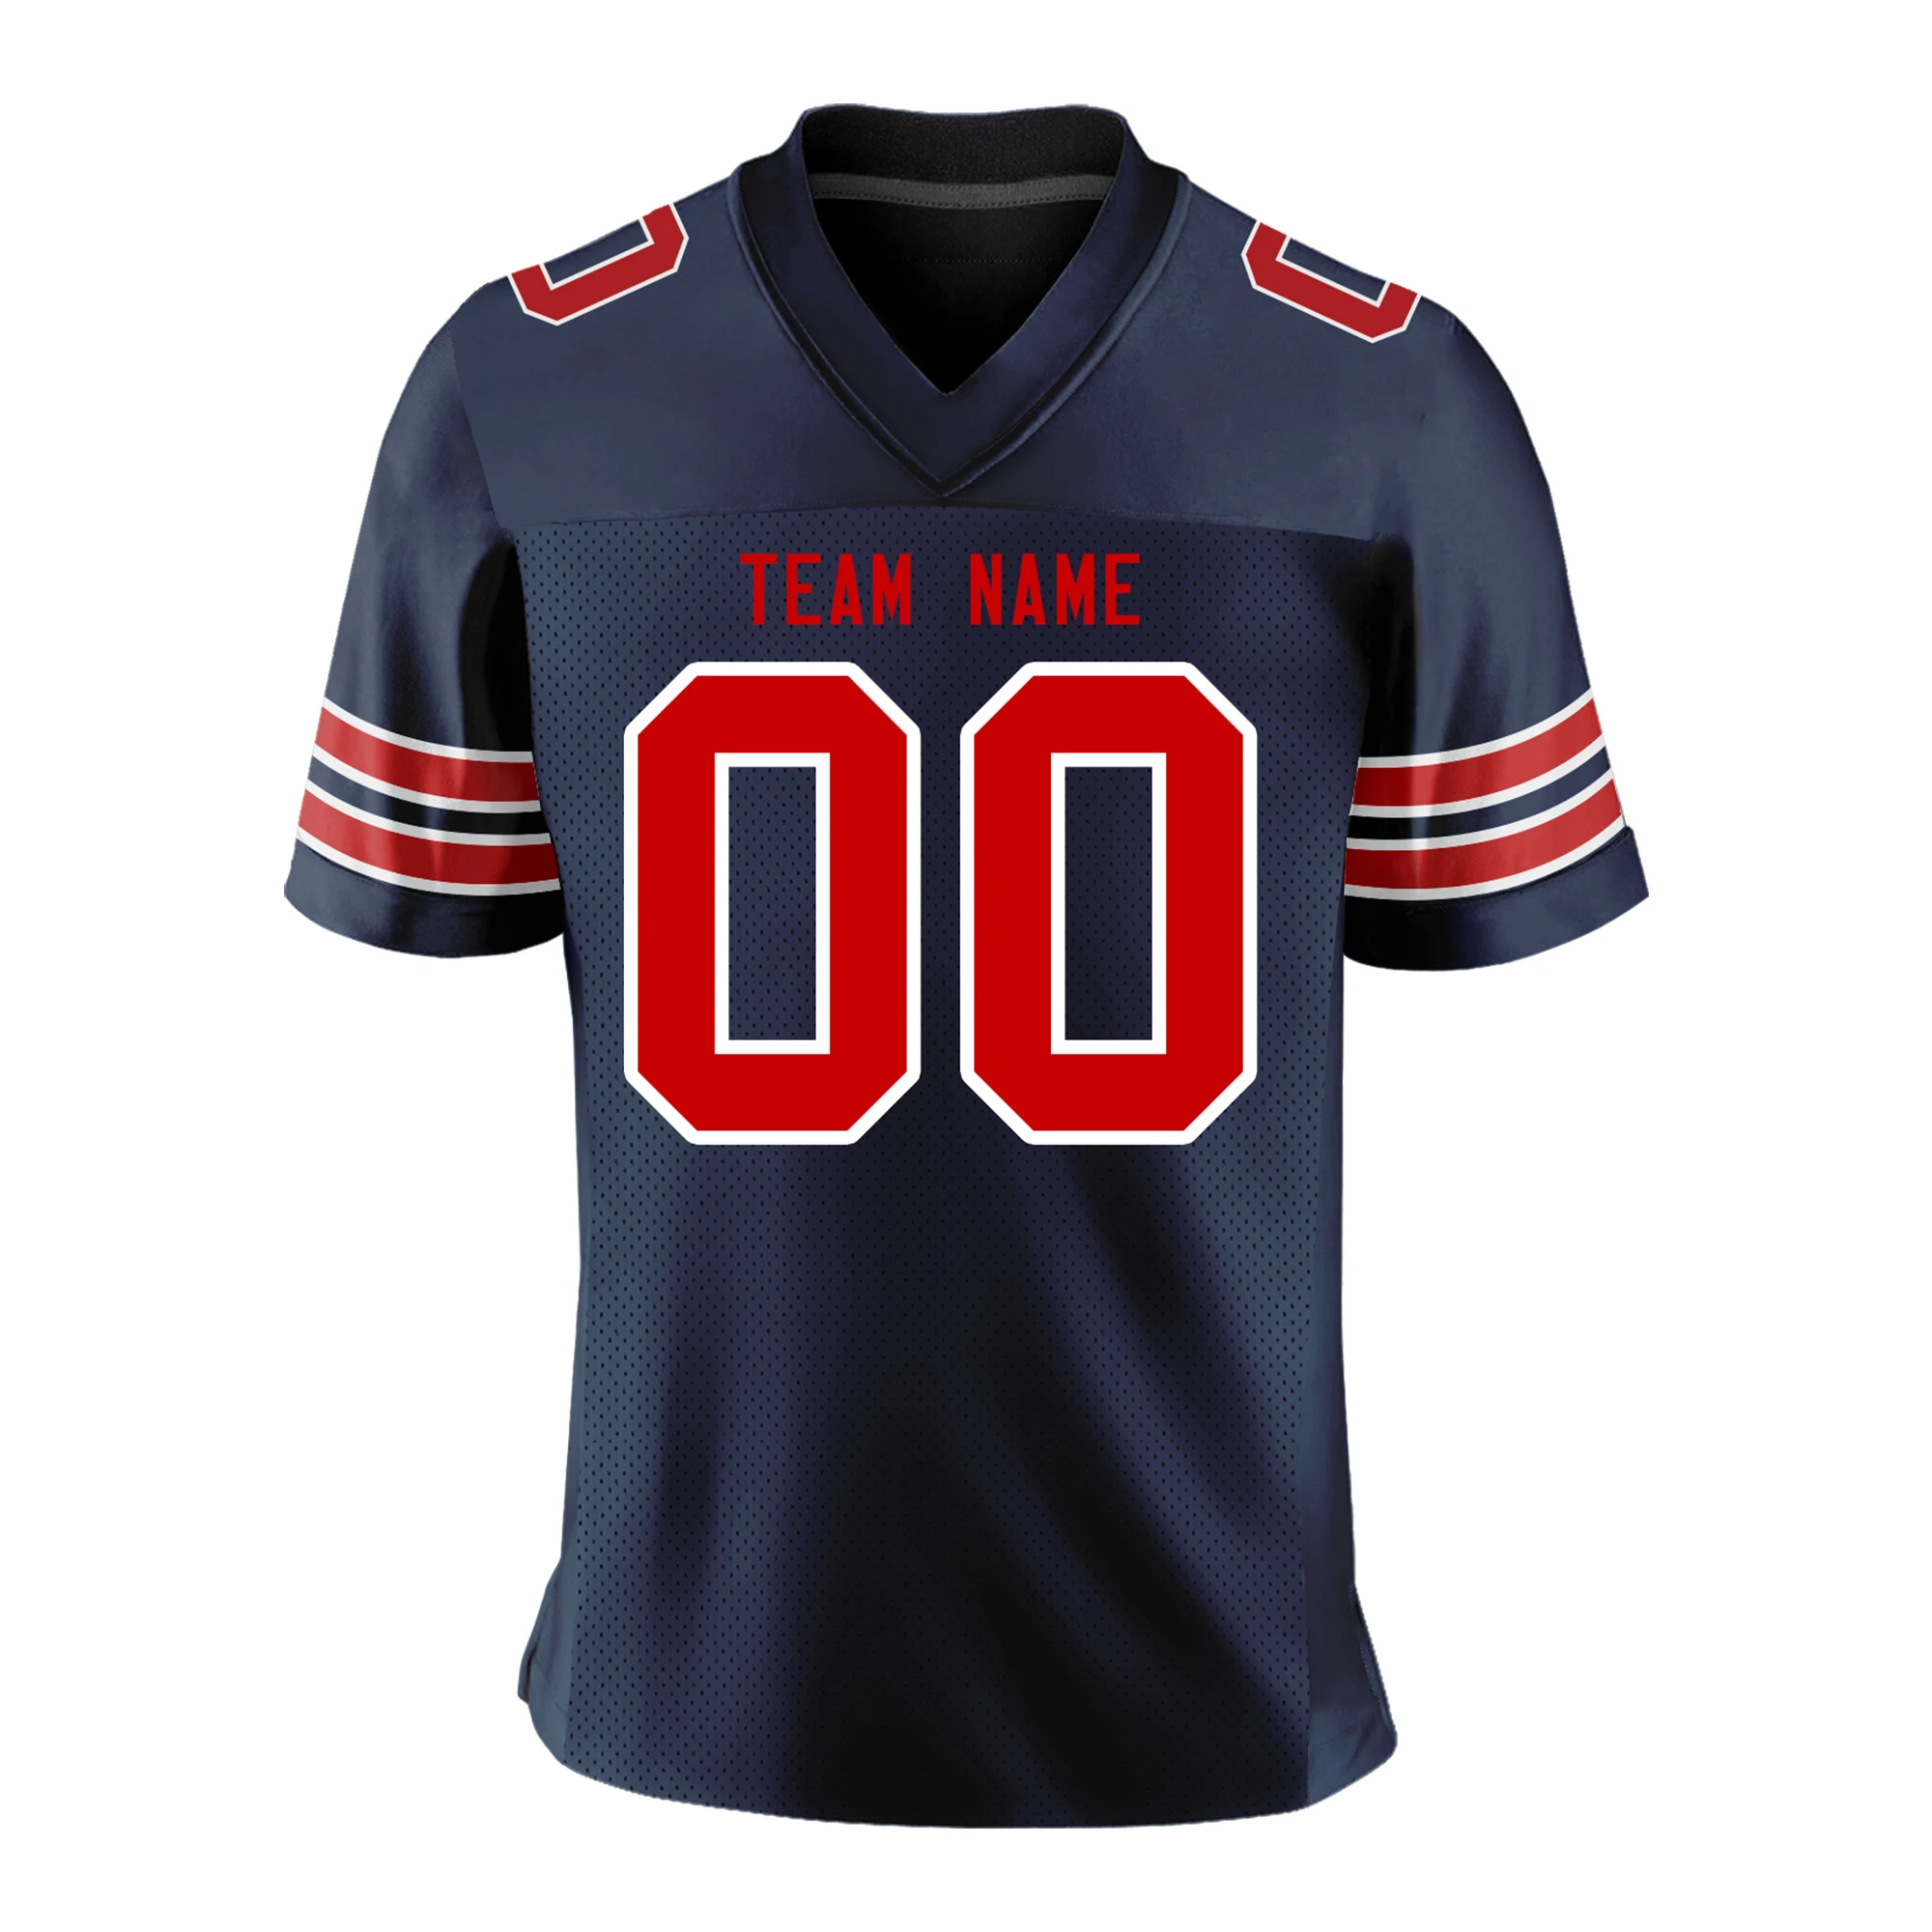 Wholesale Custom American Football Jerseys Printed Team Name Number Rugby Jersey Breathable Stretch Football Shirt for Men/Kids